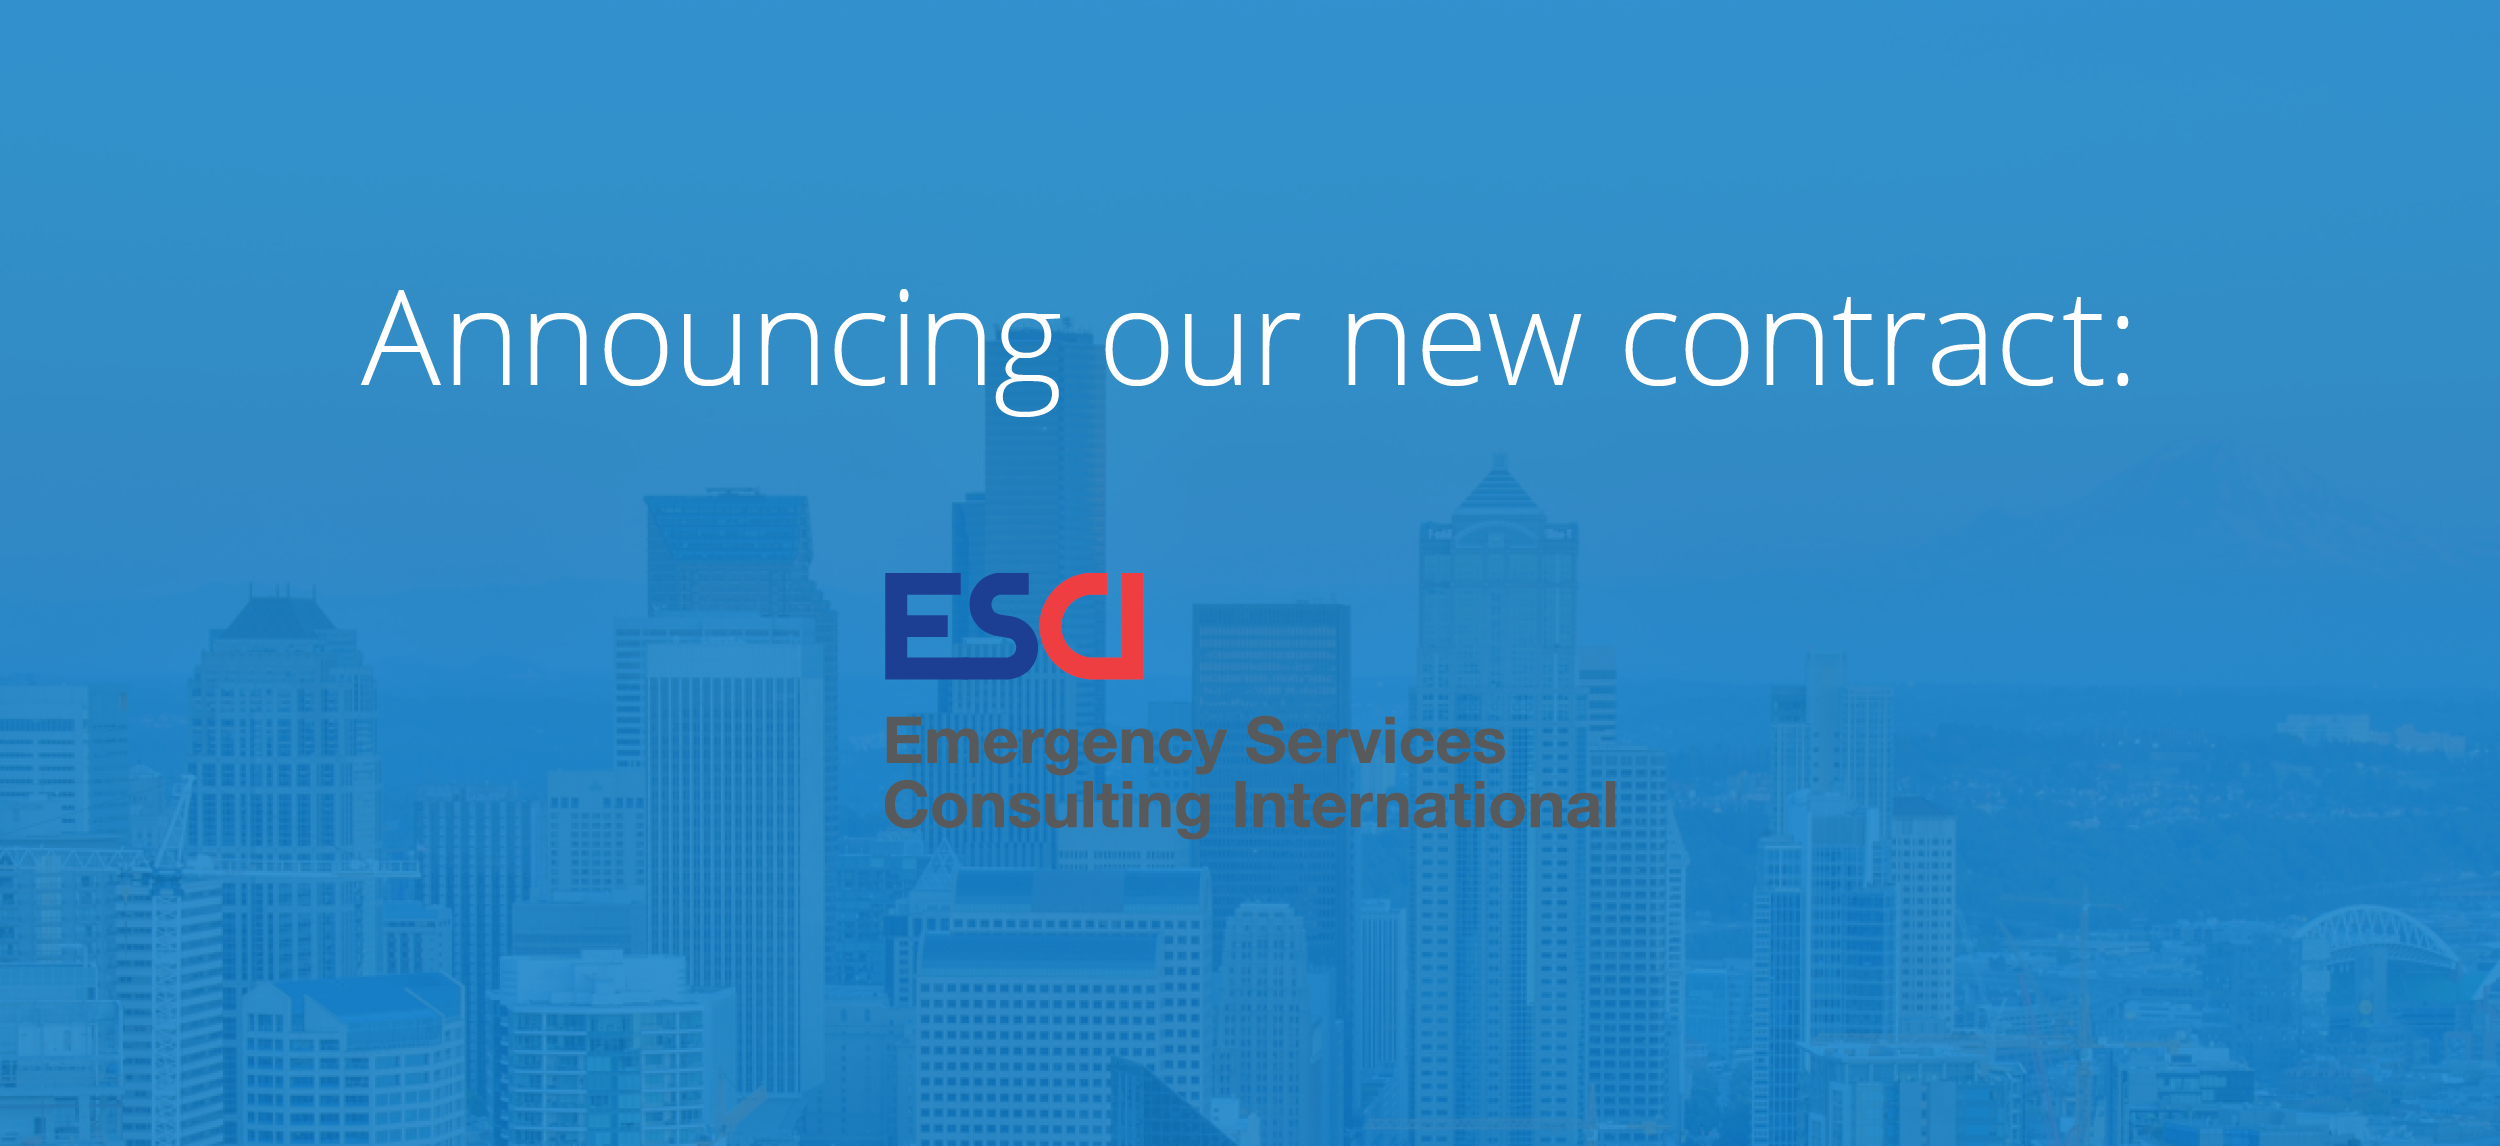 Announcing Emergency Services Consulting International (ESCI): Our Newest Contract